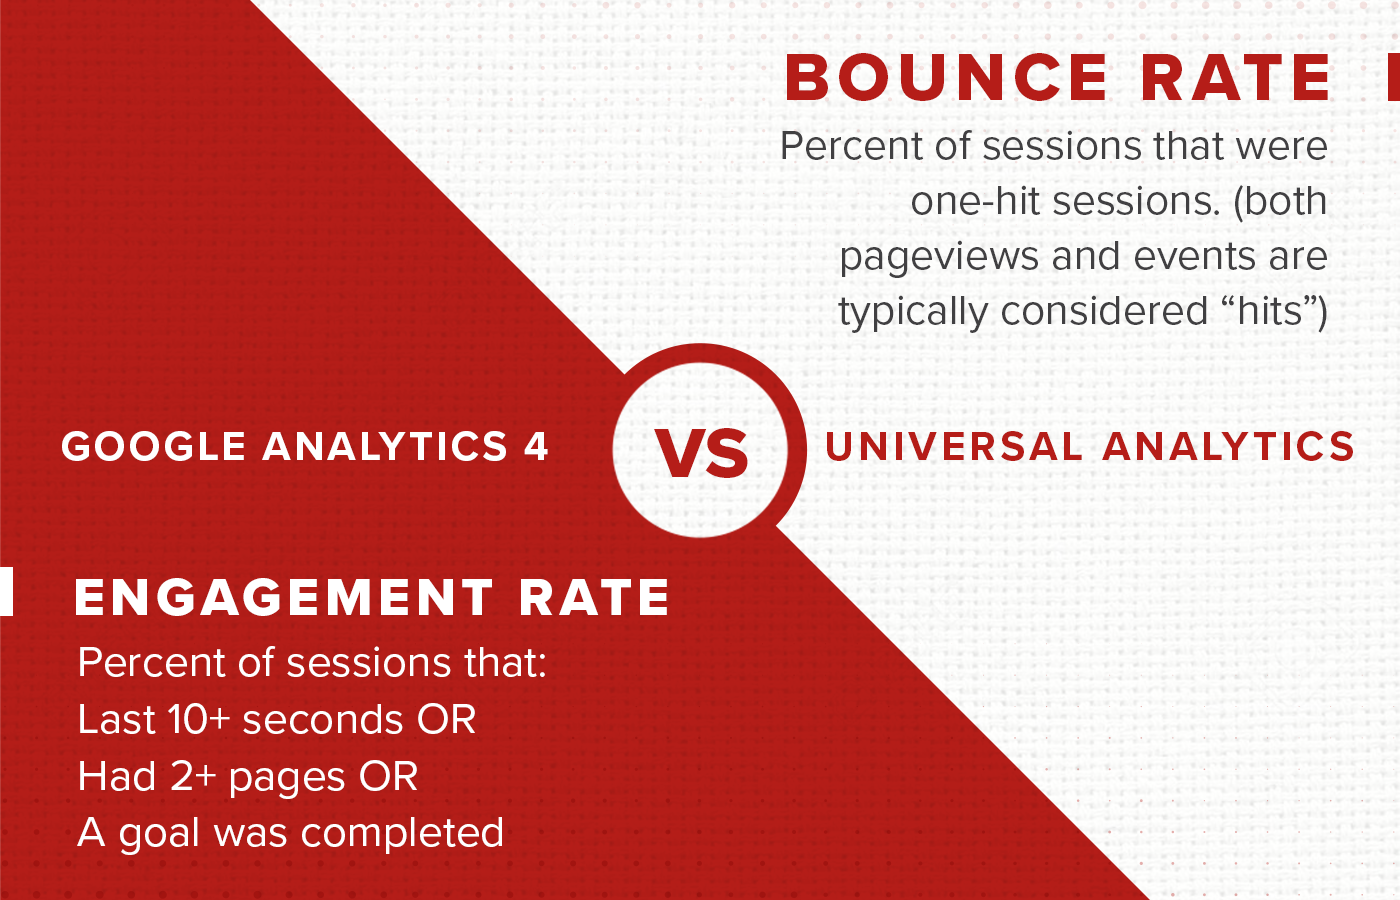 engagement rate vs bounce rate